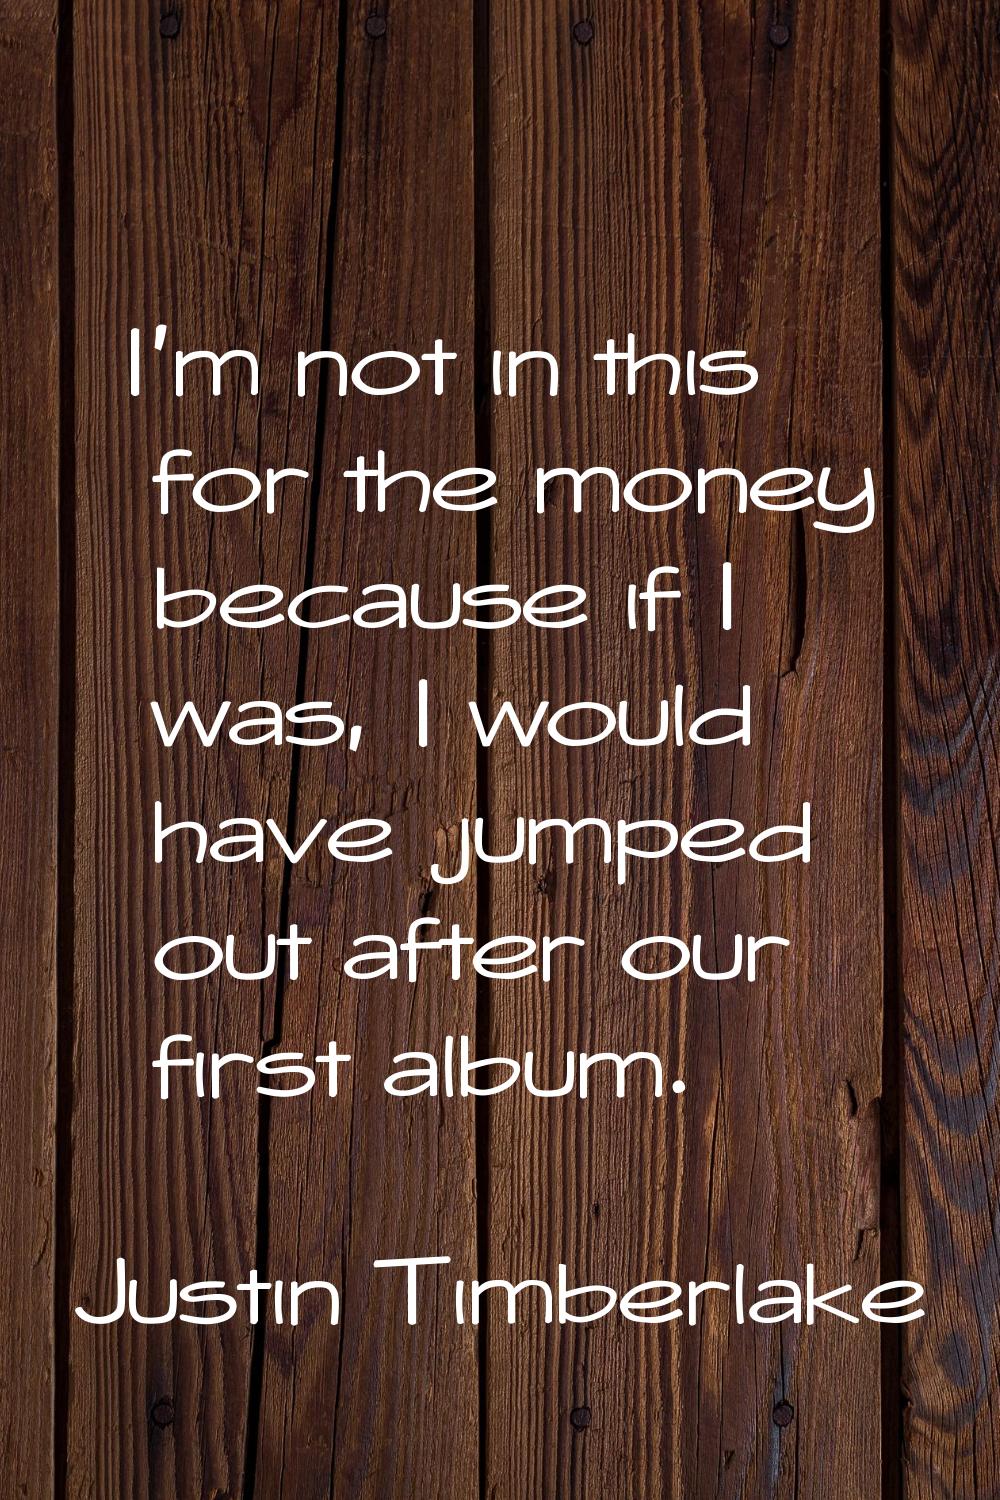 I'm not in this for the money because if I was, I would have jumped out after our first album.